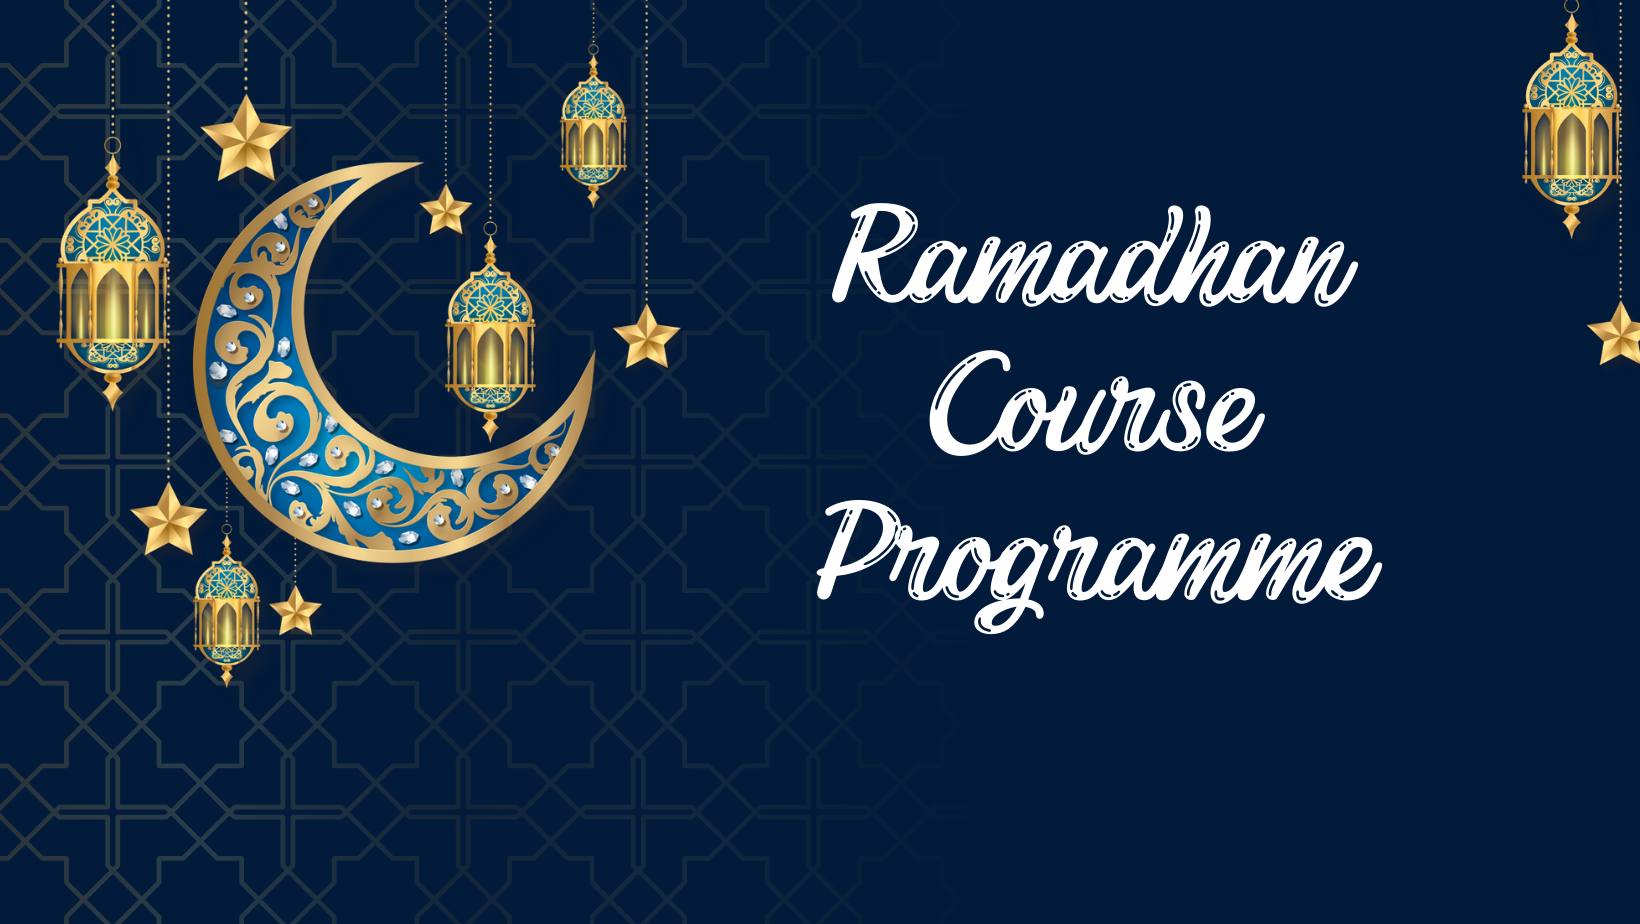 Blue & Gold Realism object Ramadan Greeting Facebook Cover